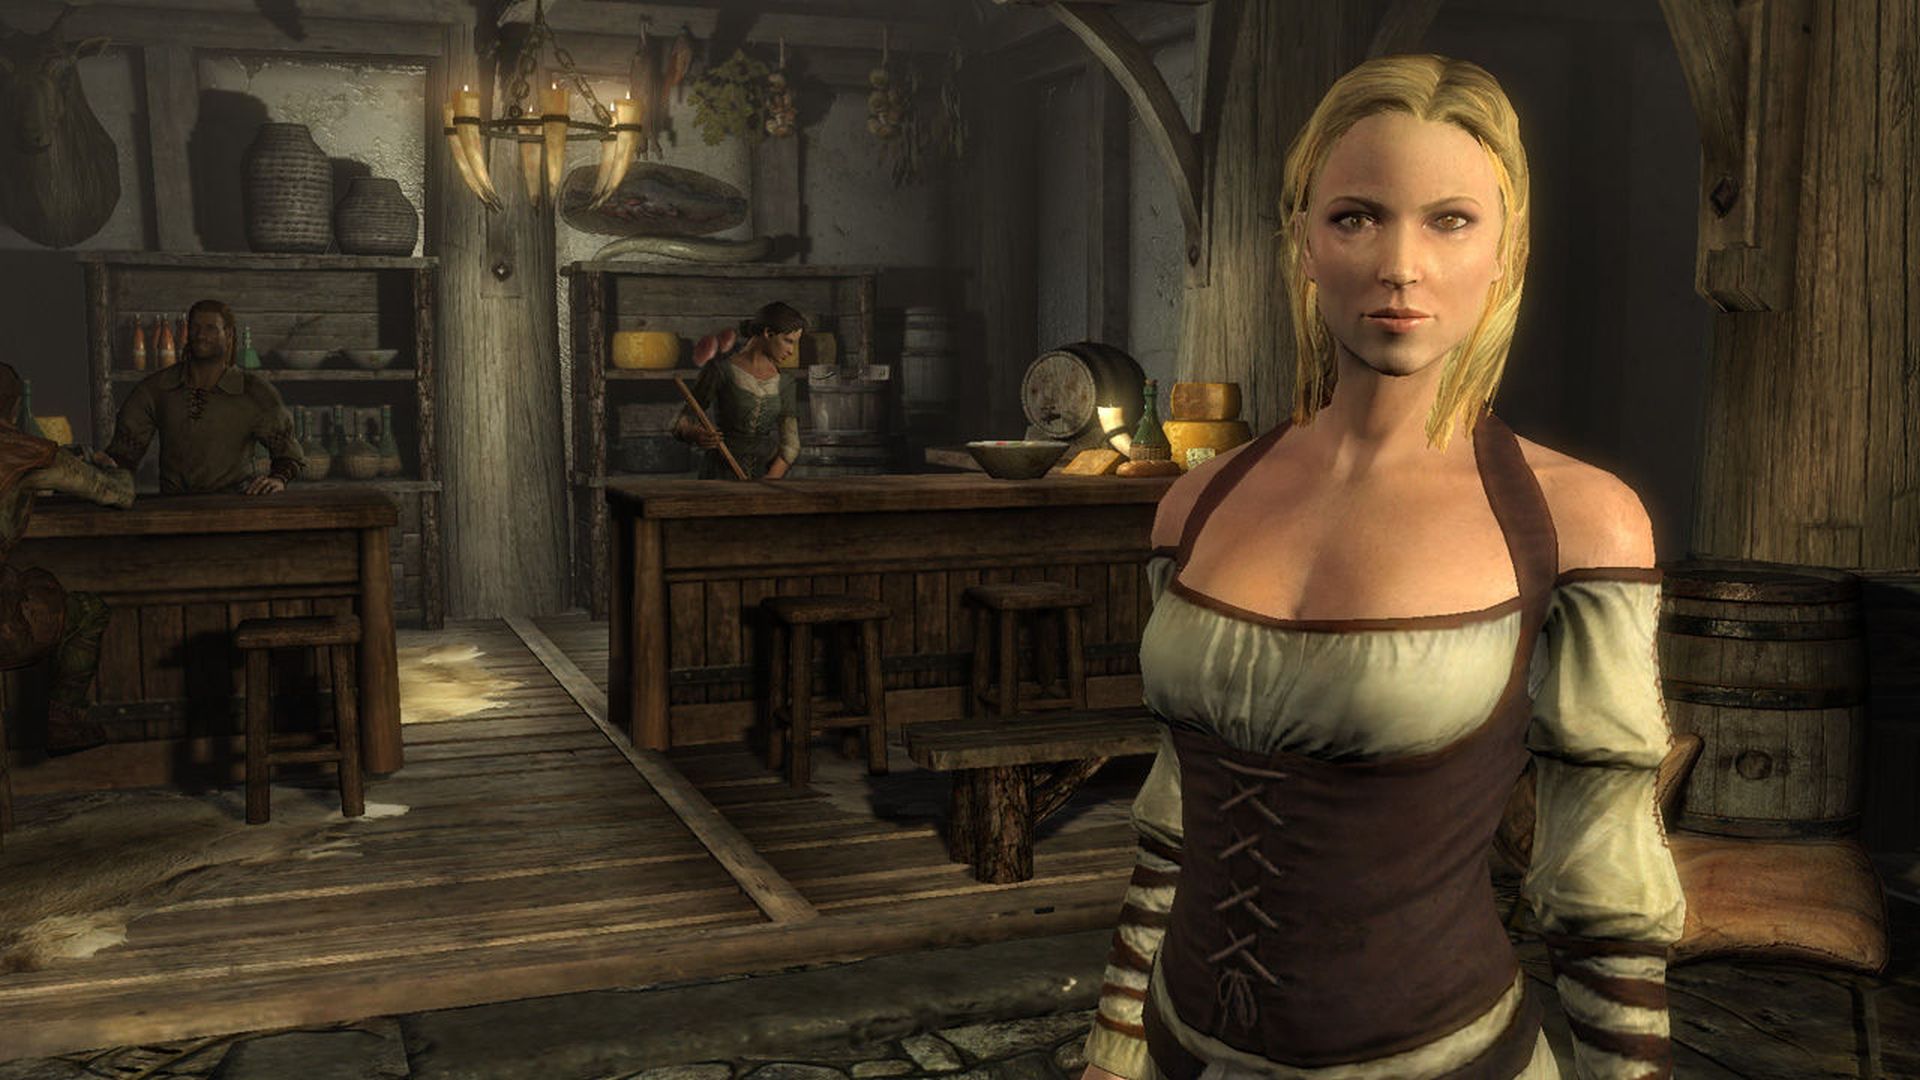 This popular Skyrim mod overhauls alchemy and adds “powerful” new effects